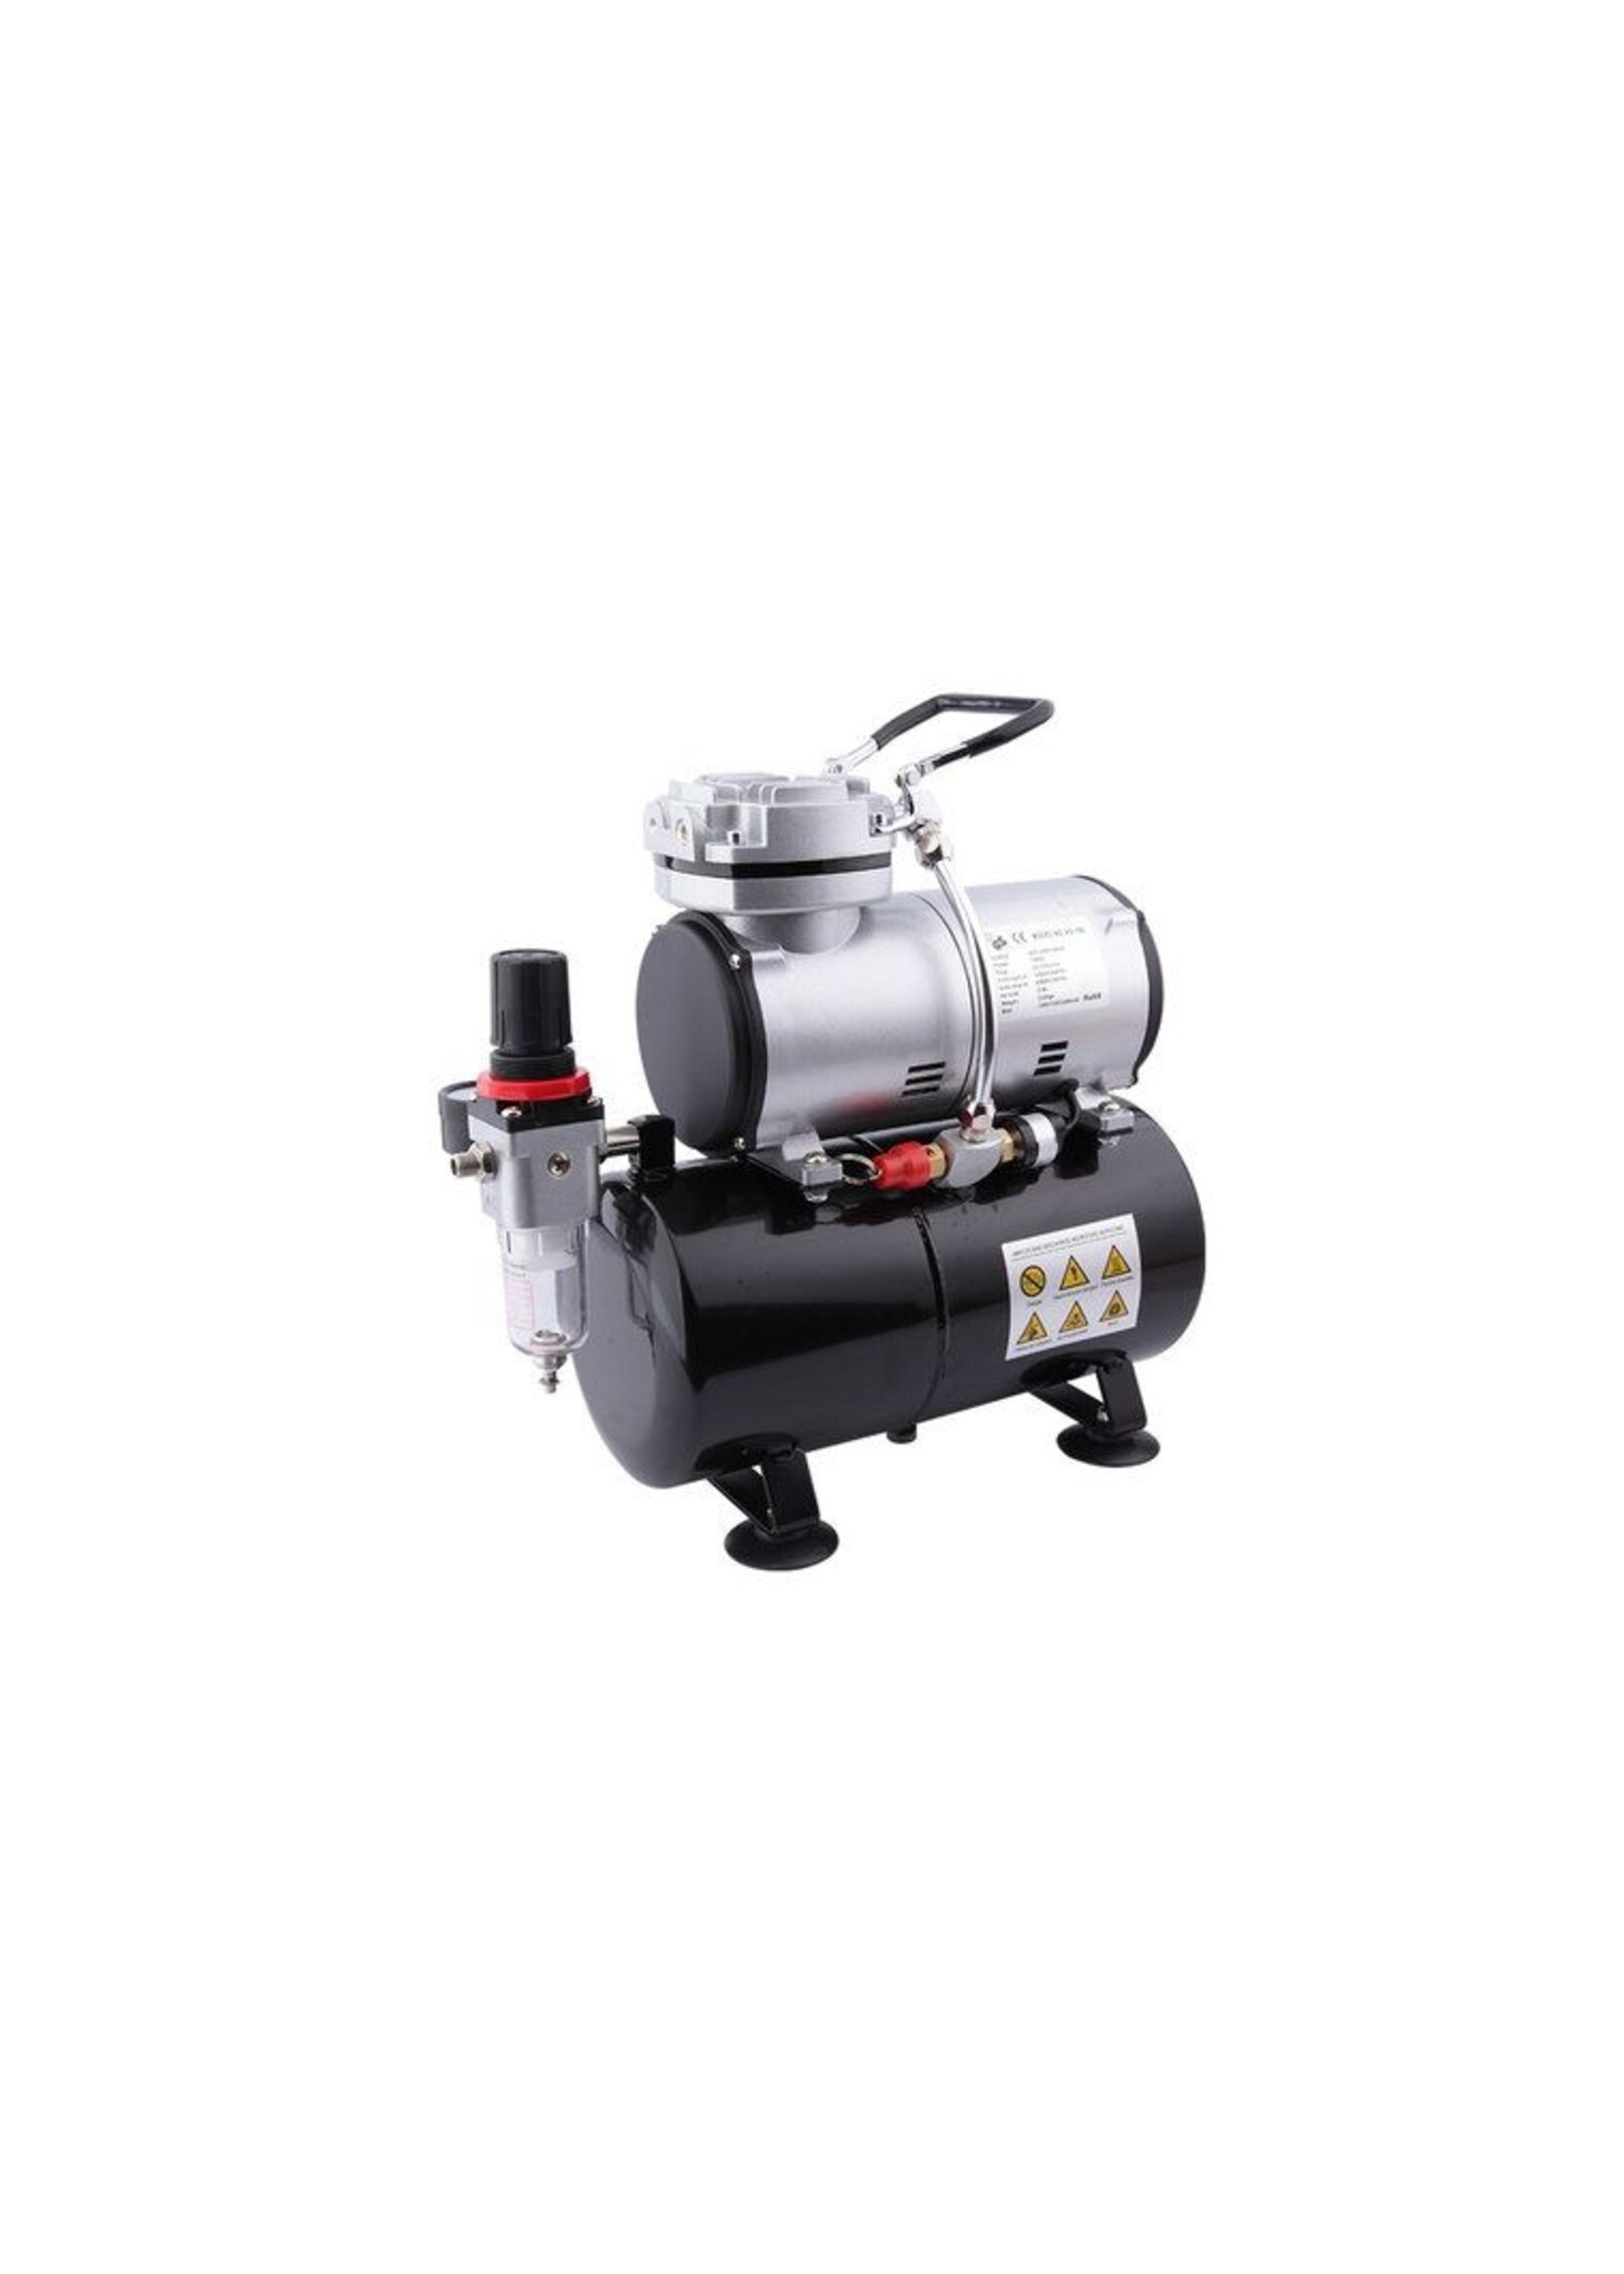 Multi-Purpose Airbrush with 4 Cylinder Piston Air Compressor with